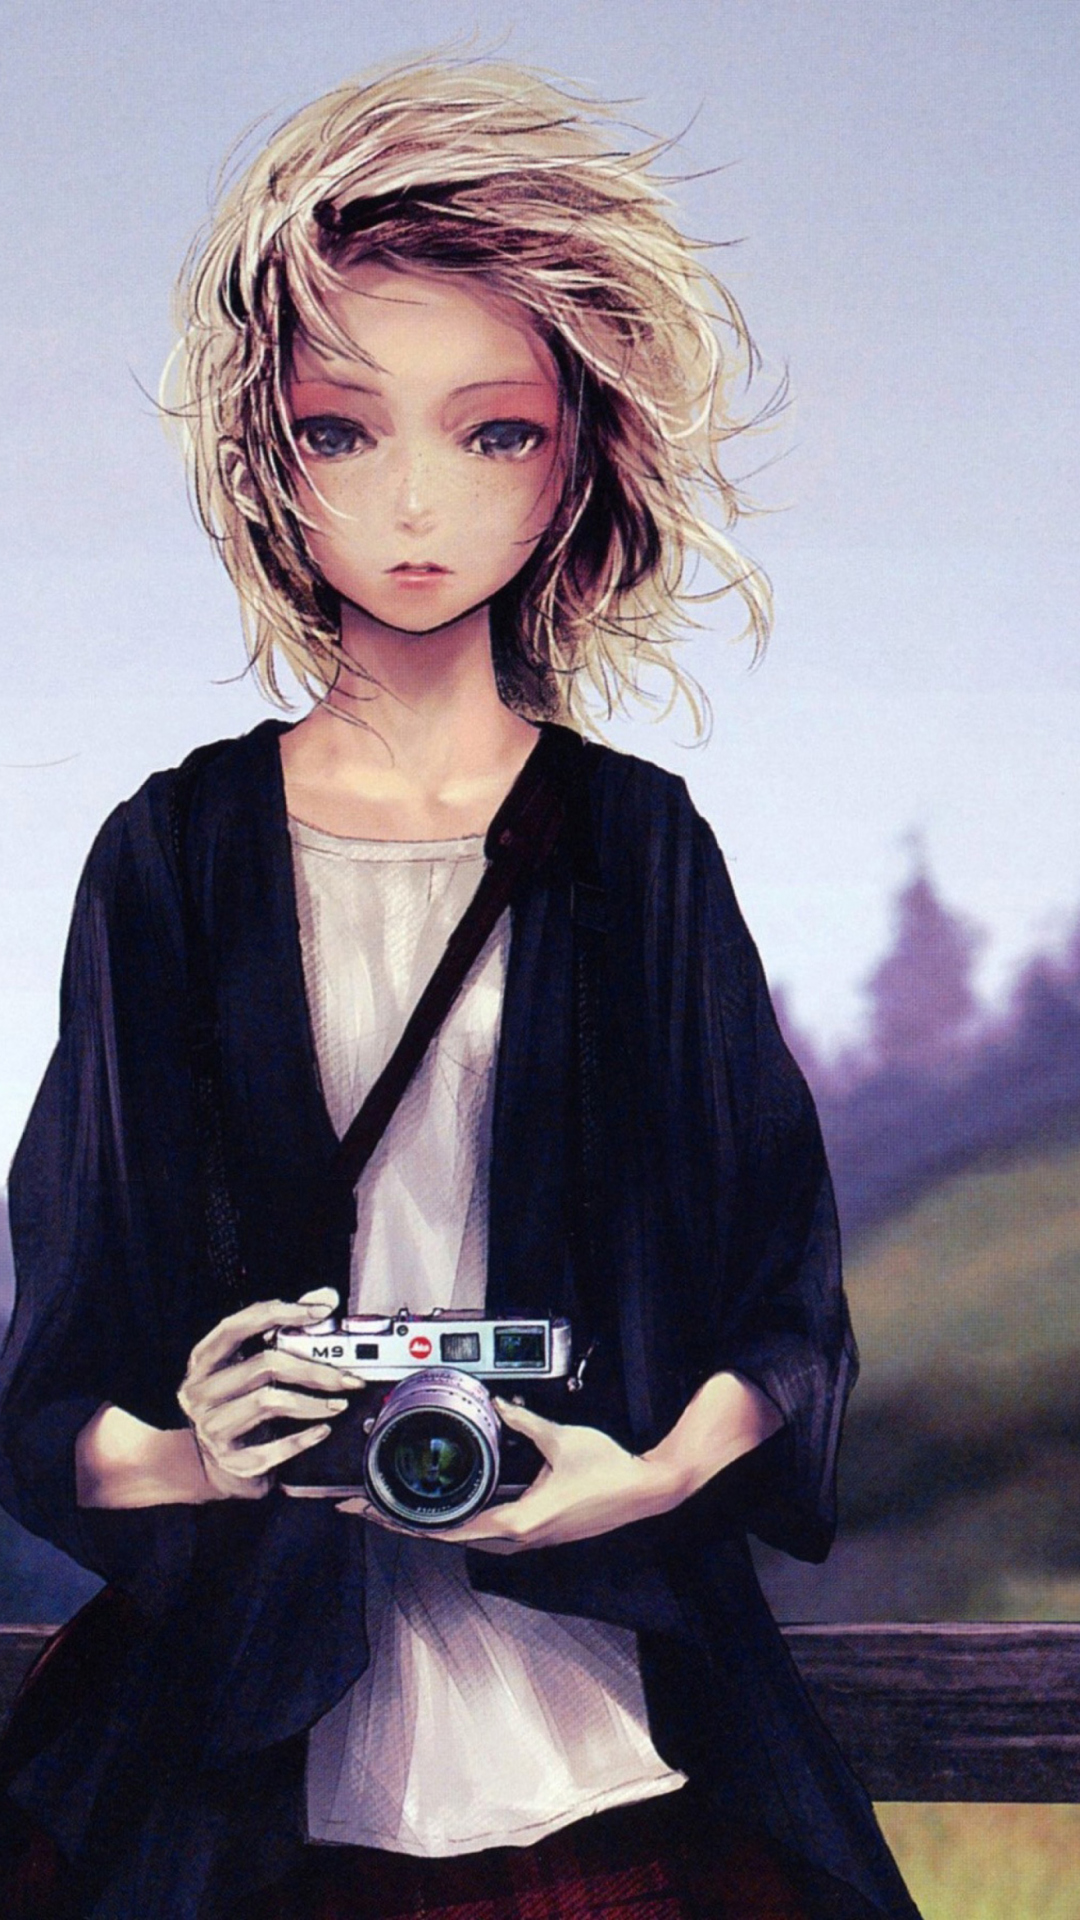 Girl With Photo Camera wallpaper 1080x1920